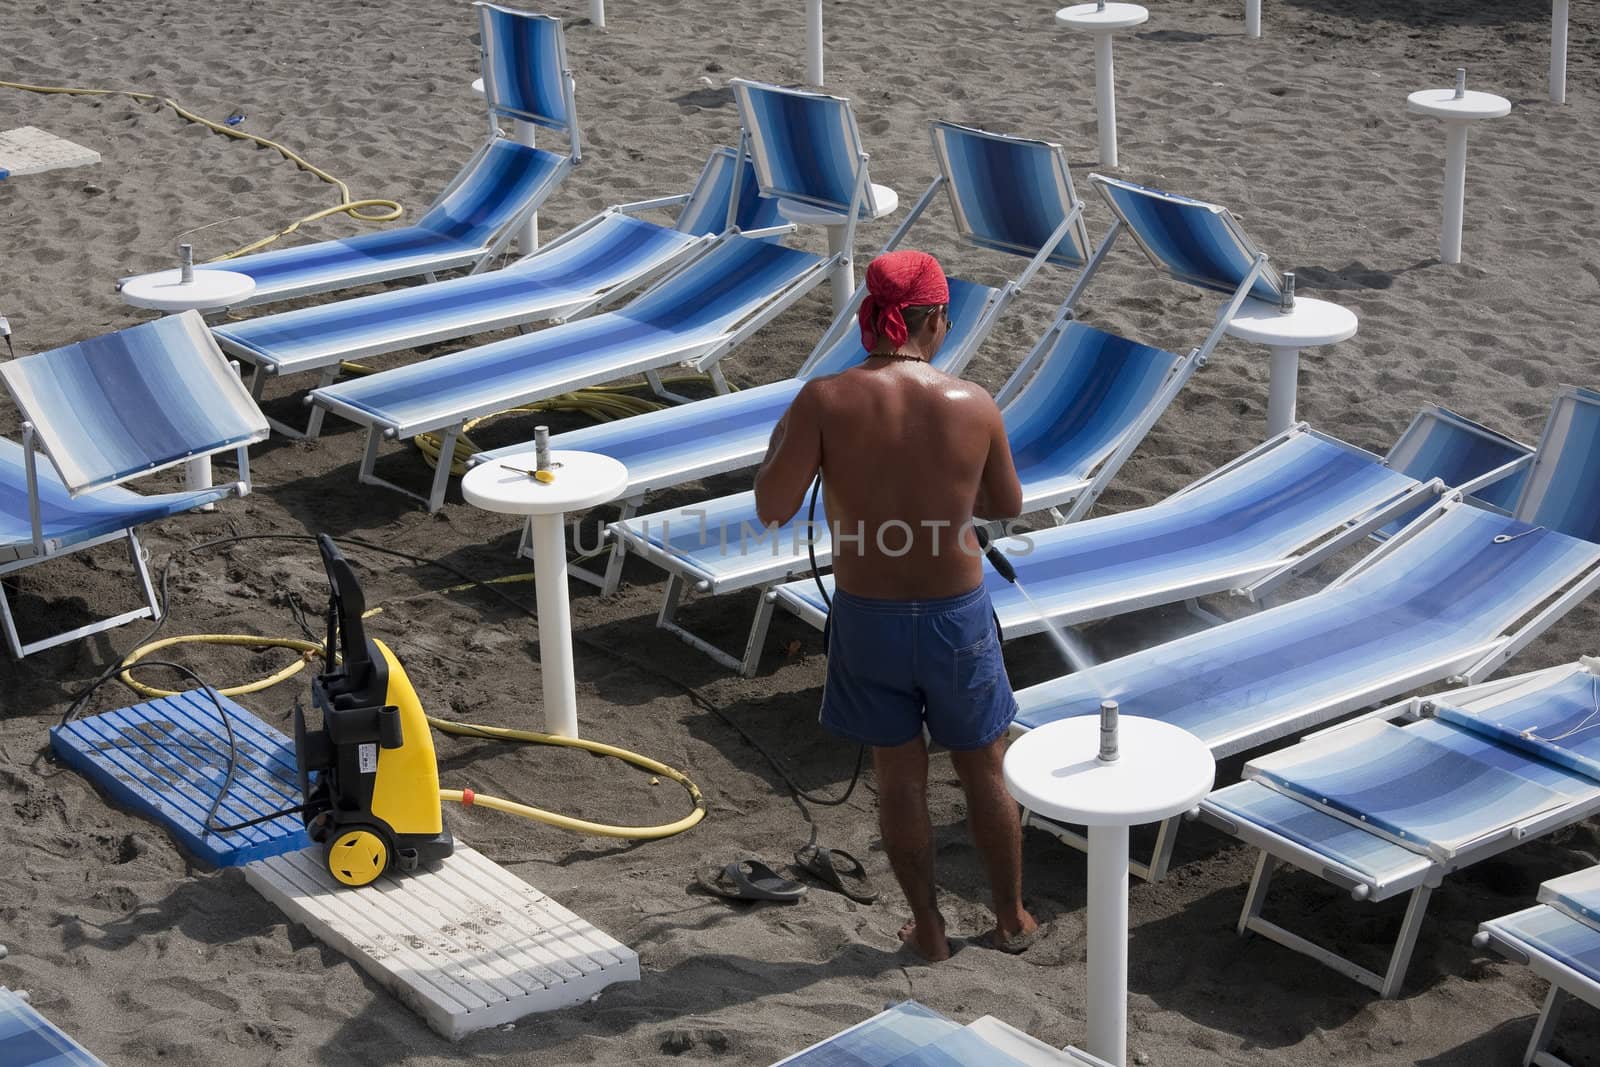 Hight pressure cleaning of sunbeds on Italian beach after end of the season.